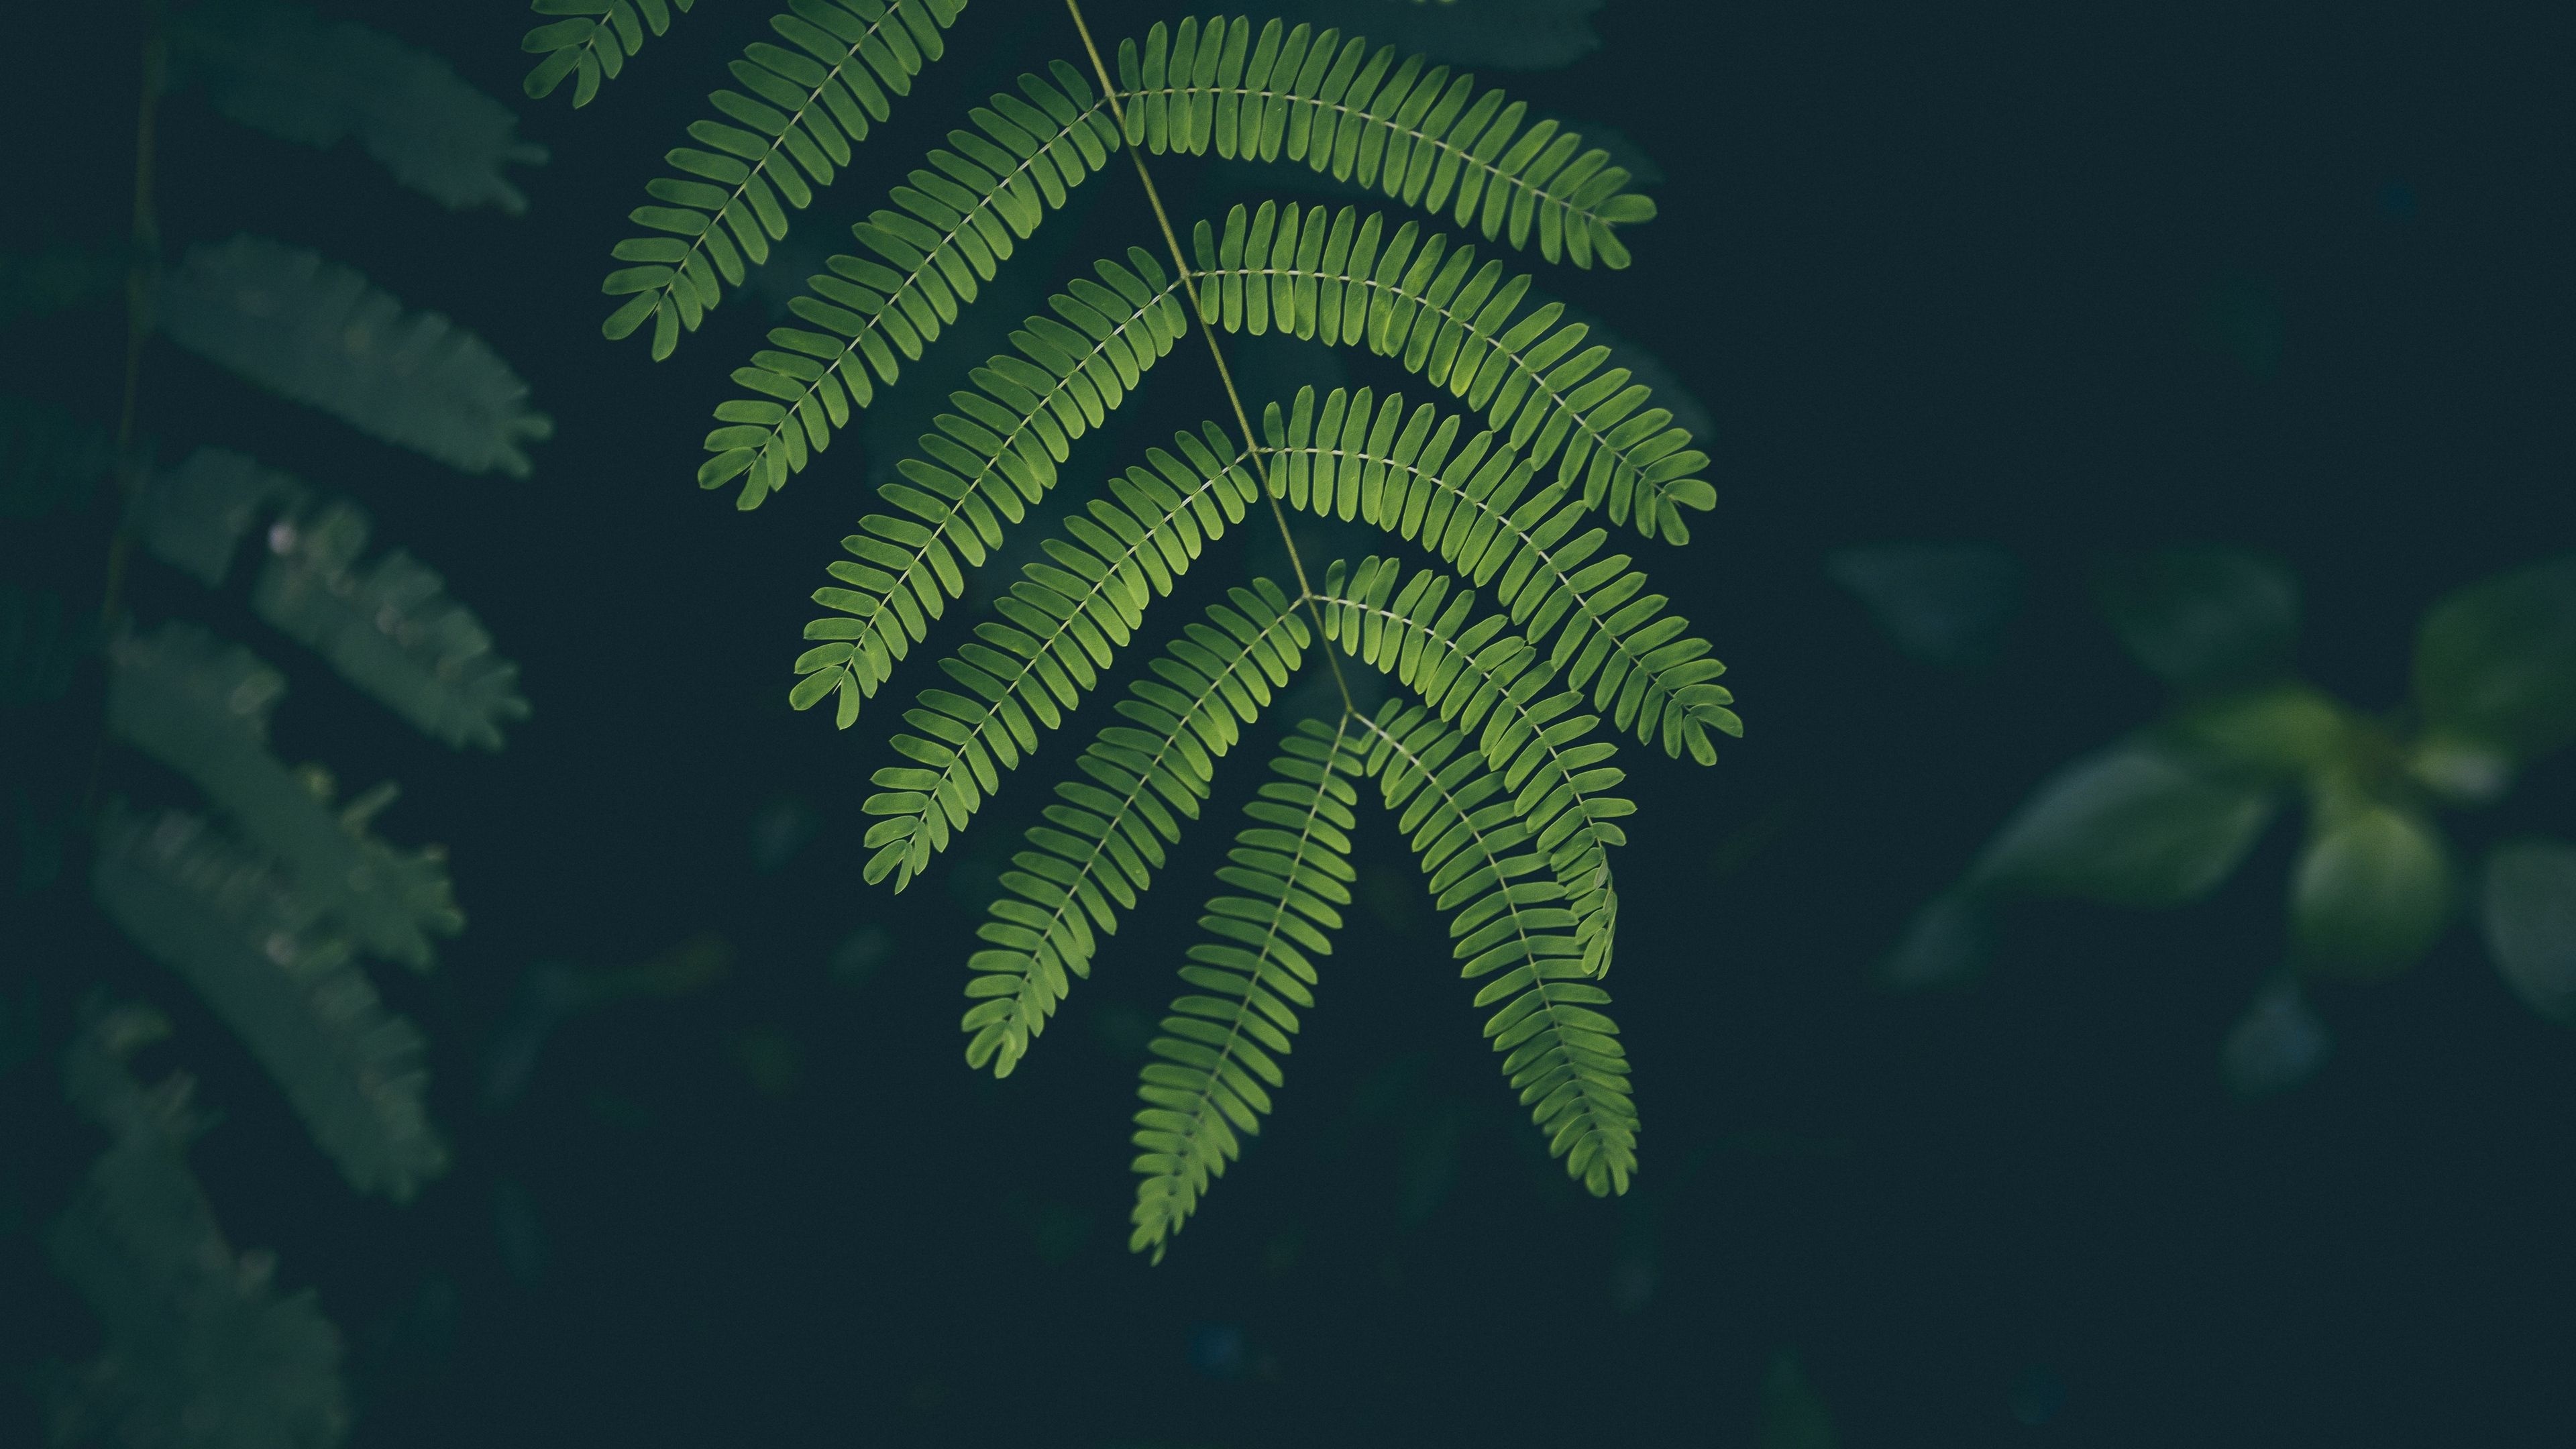 Green Leaf: Leaves in a tropical forest, Jungle section at the botanical gardens. 3840x2160 4K Background.